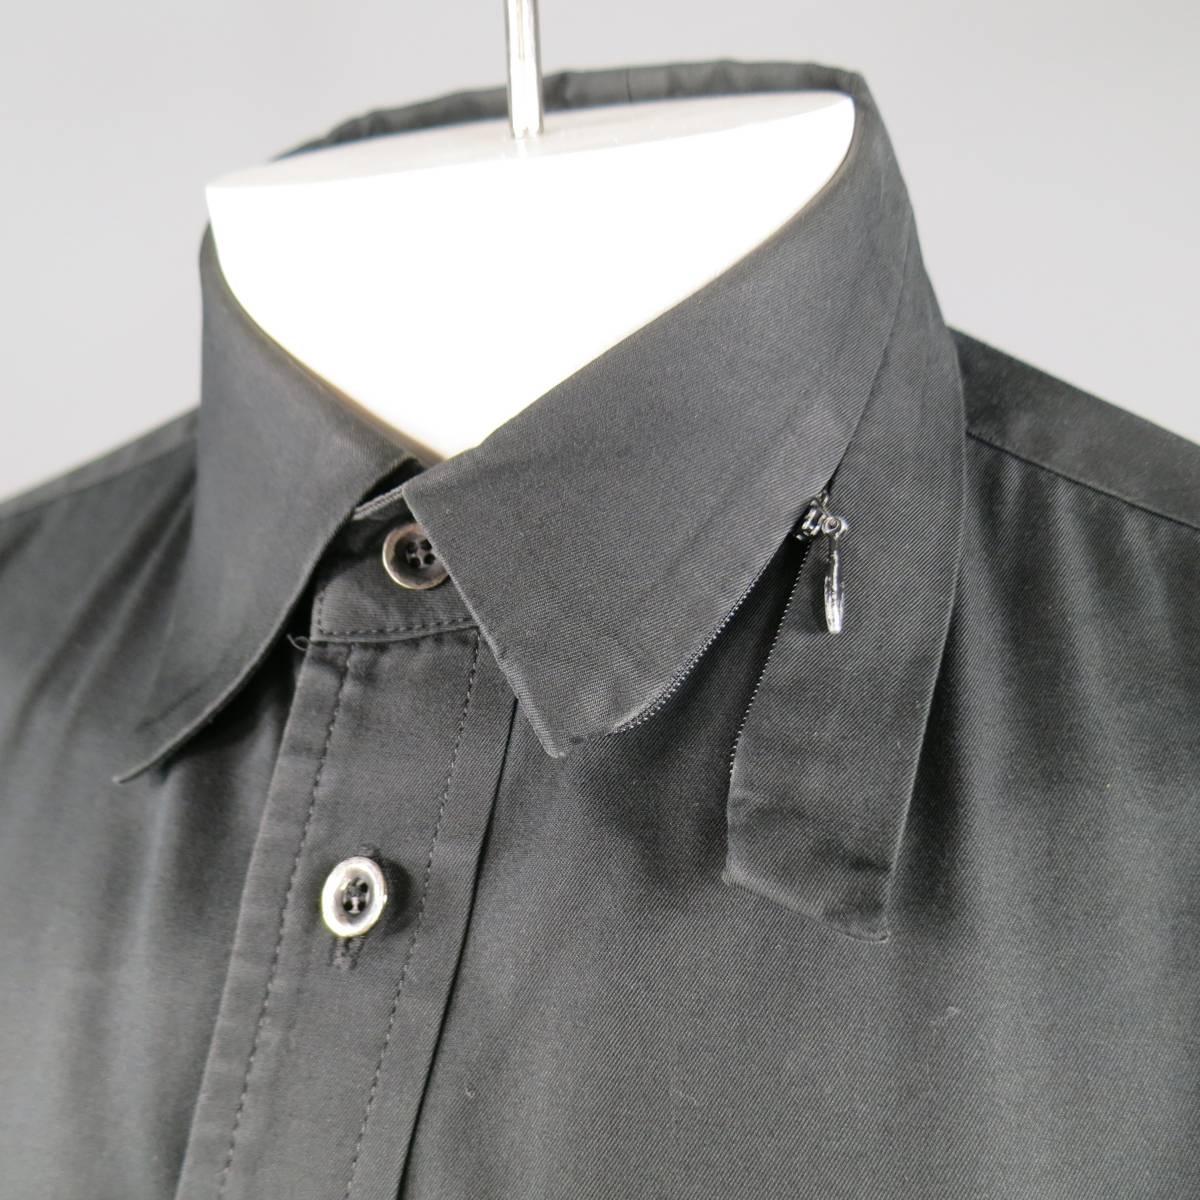 Vintage YOHJI YAMAMOTO shirt in a black cotton twill featuring a patch breast pocket, zip and button cuffs, and unique half zip collar. Fading throughout. As-Is. Made in Japan.
 
Fair Pre-Owned Condition.
Marked: JP 3
 
Measurements:
 
Shoulder: 18